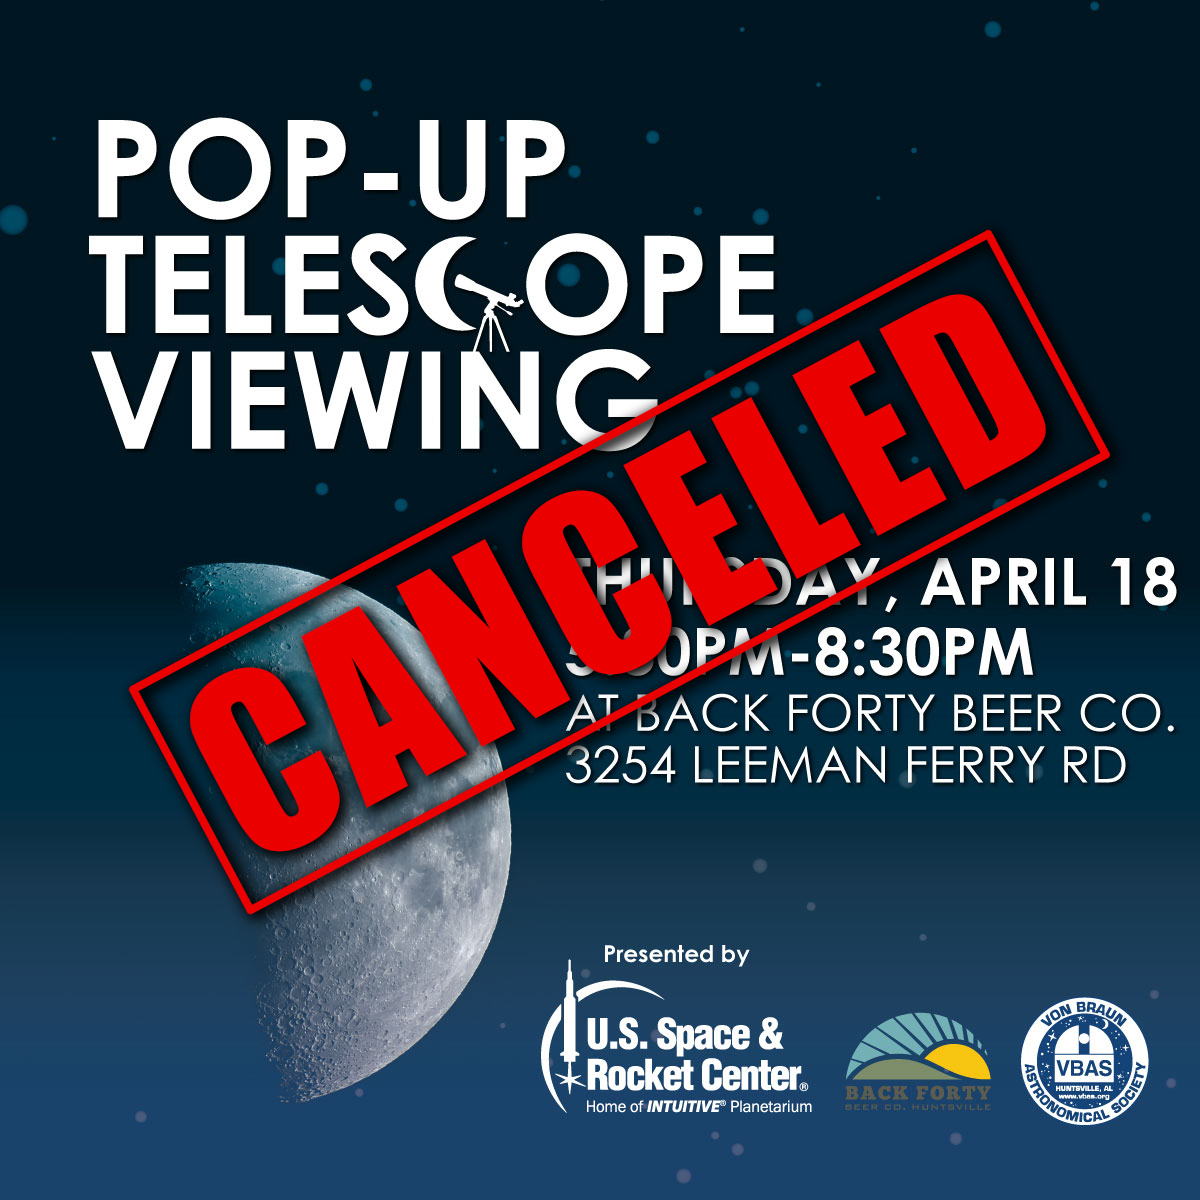 Unfortunately, due to cloud cover, we have to cancel tonight's Pop-up Telescope event at @back40beer. We'll let you know when there is another opportunity to hang out with the INTUITIVE® Planetarium team.